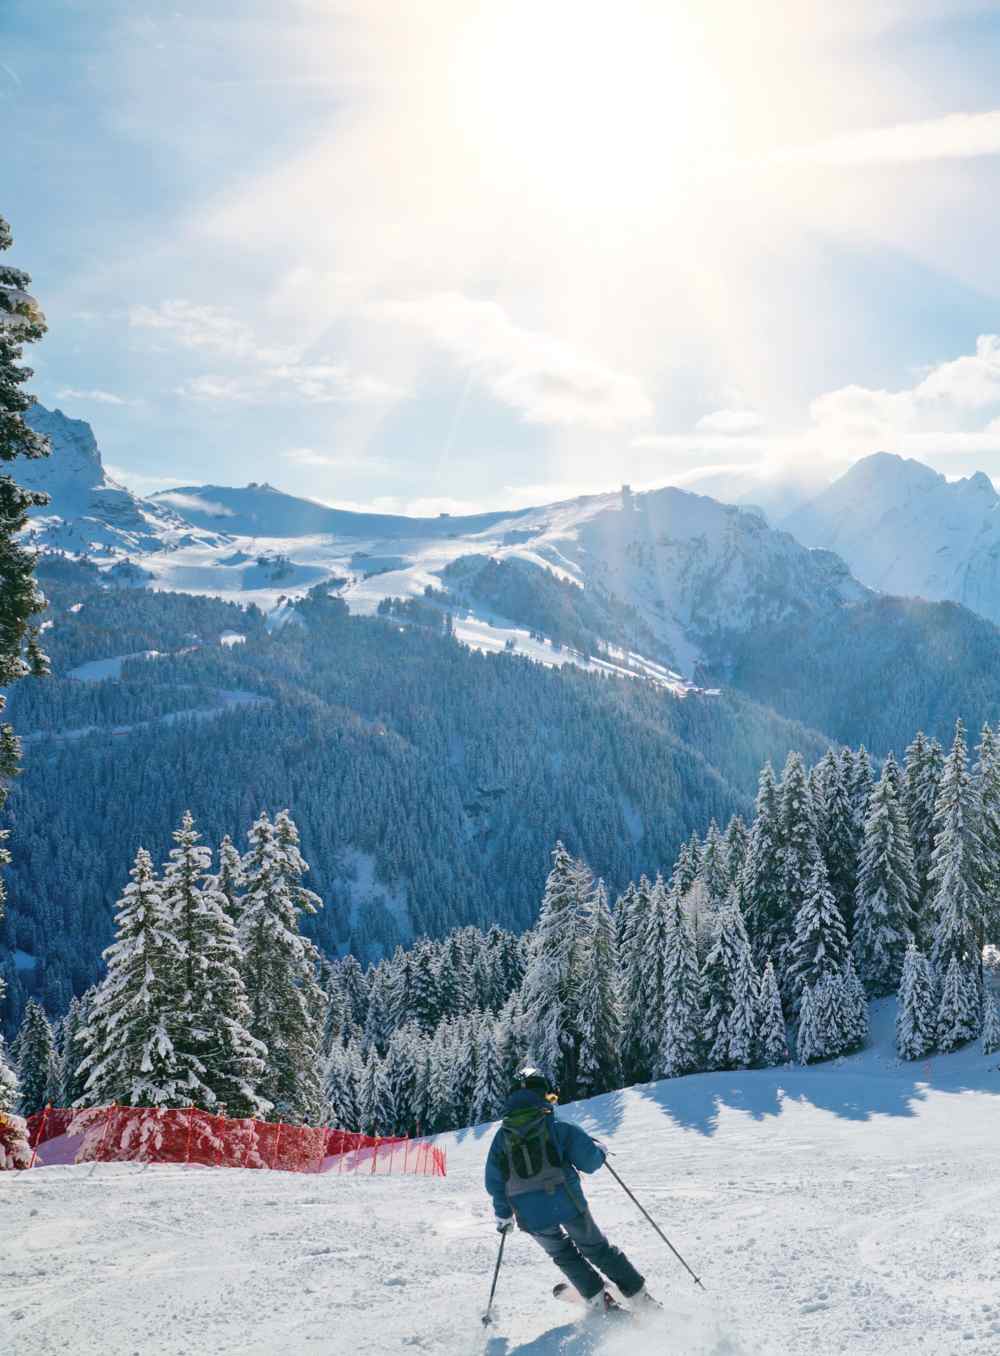 Skiing the pistes of the Dolomites